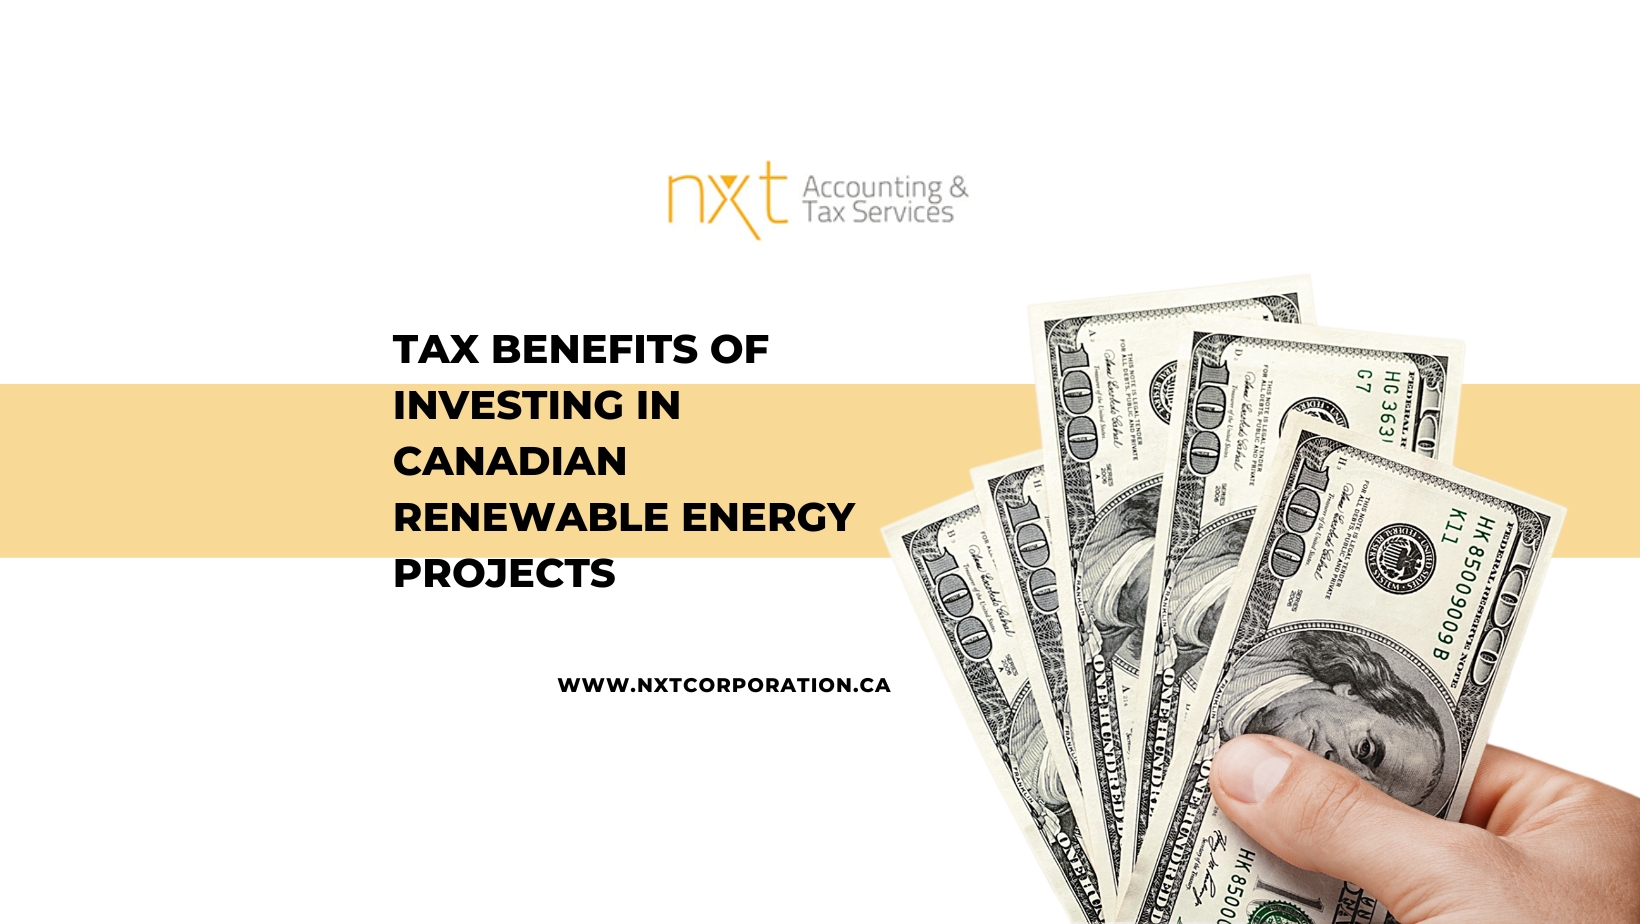 Tax Benefits of Investing in Canadian Renewable Energy Projects